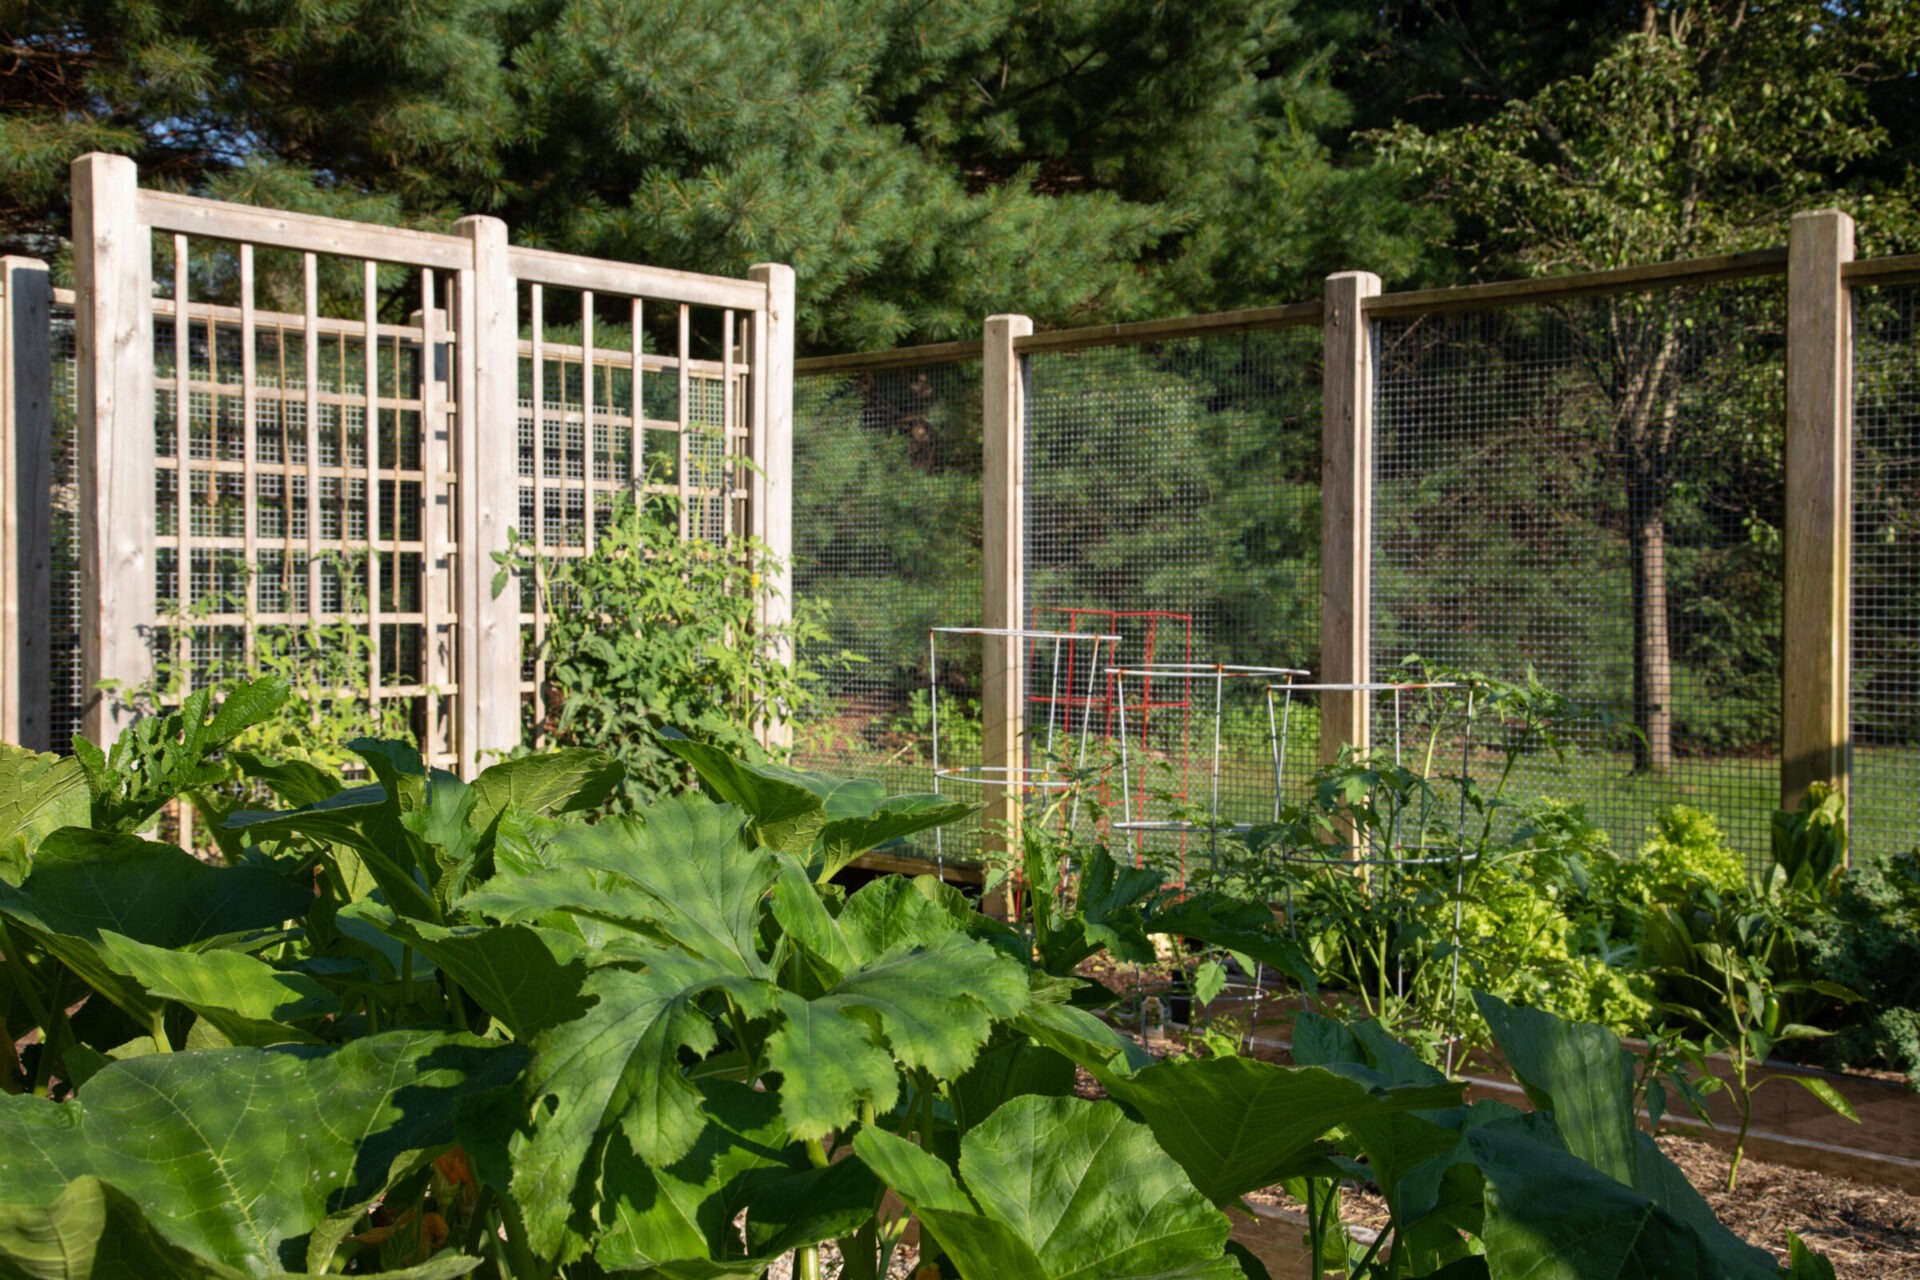 A peaceful garden with large leafy plants in the foreground, wooden trellises, and a mesh fence under a clear sky with sunlight filtering through trees.